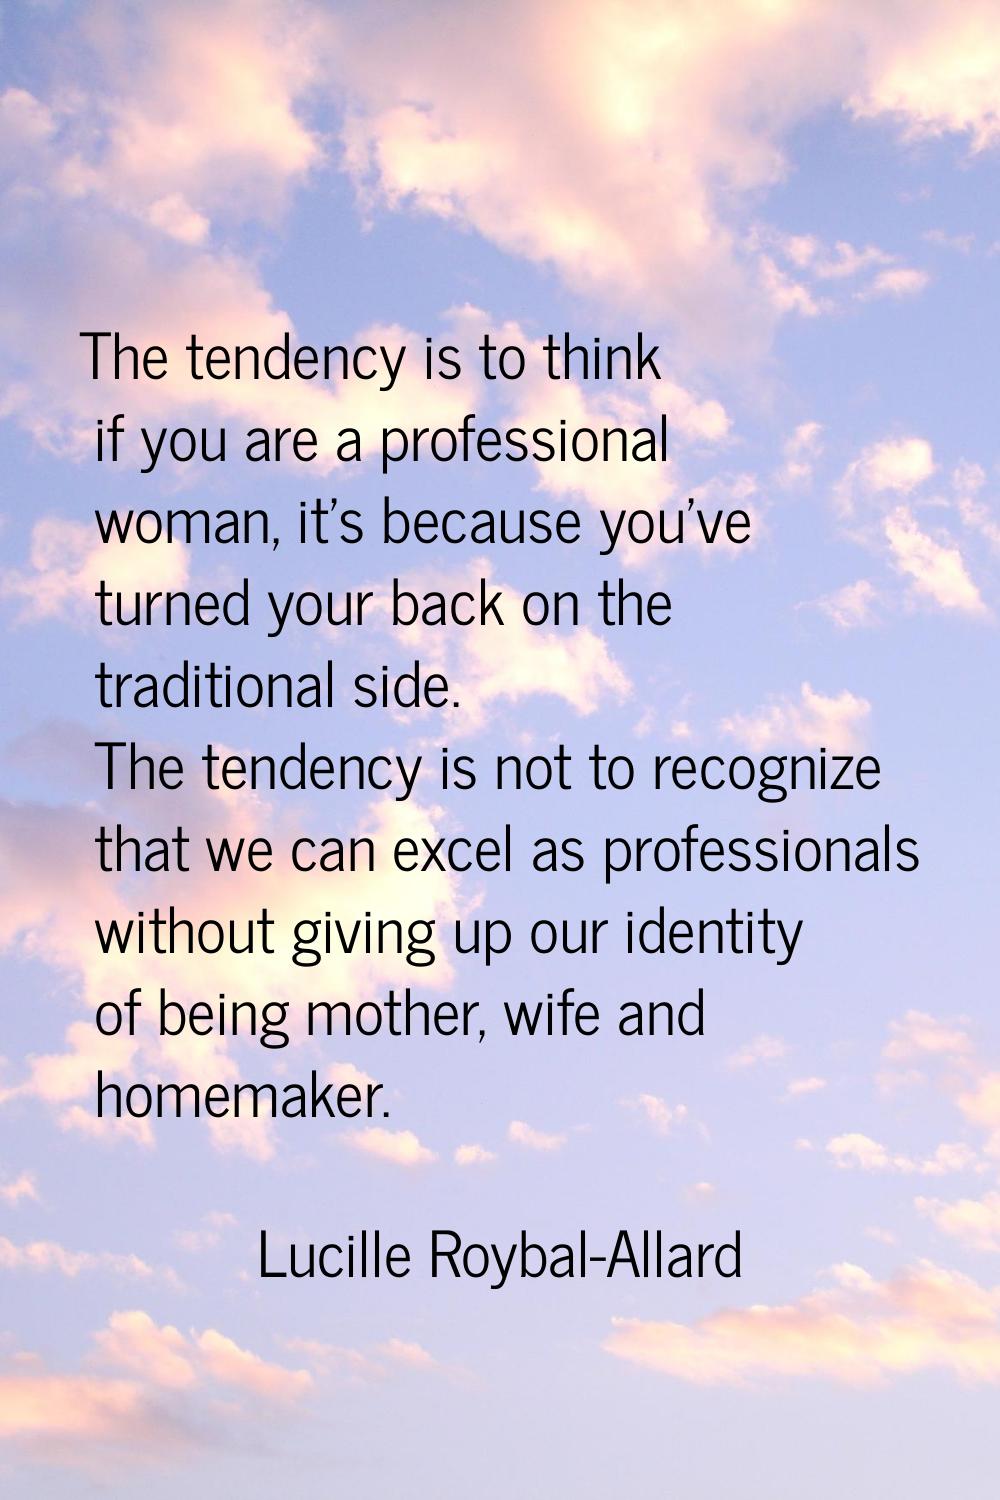 The tendency is to think if you are a professional woman, it's because you've turned your back on t